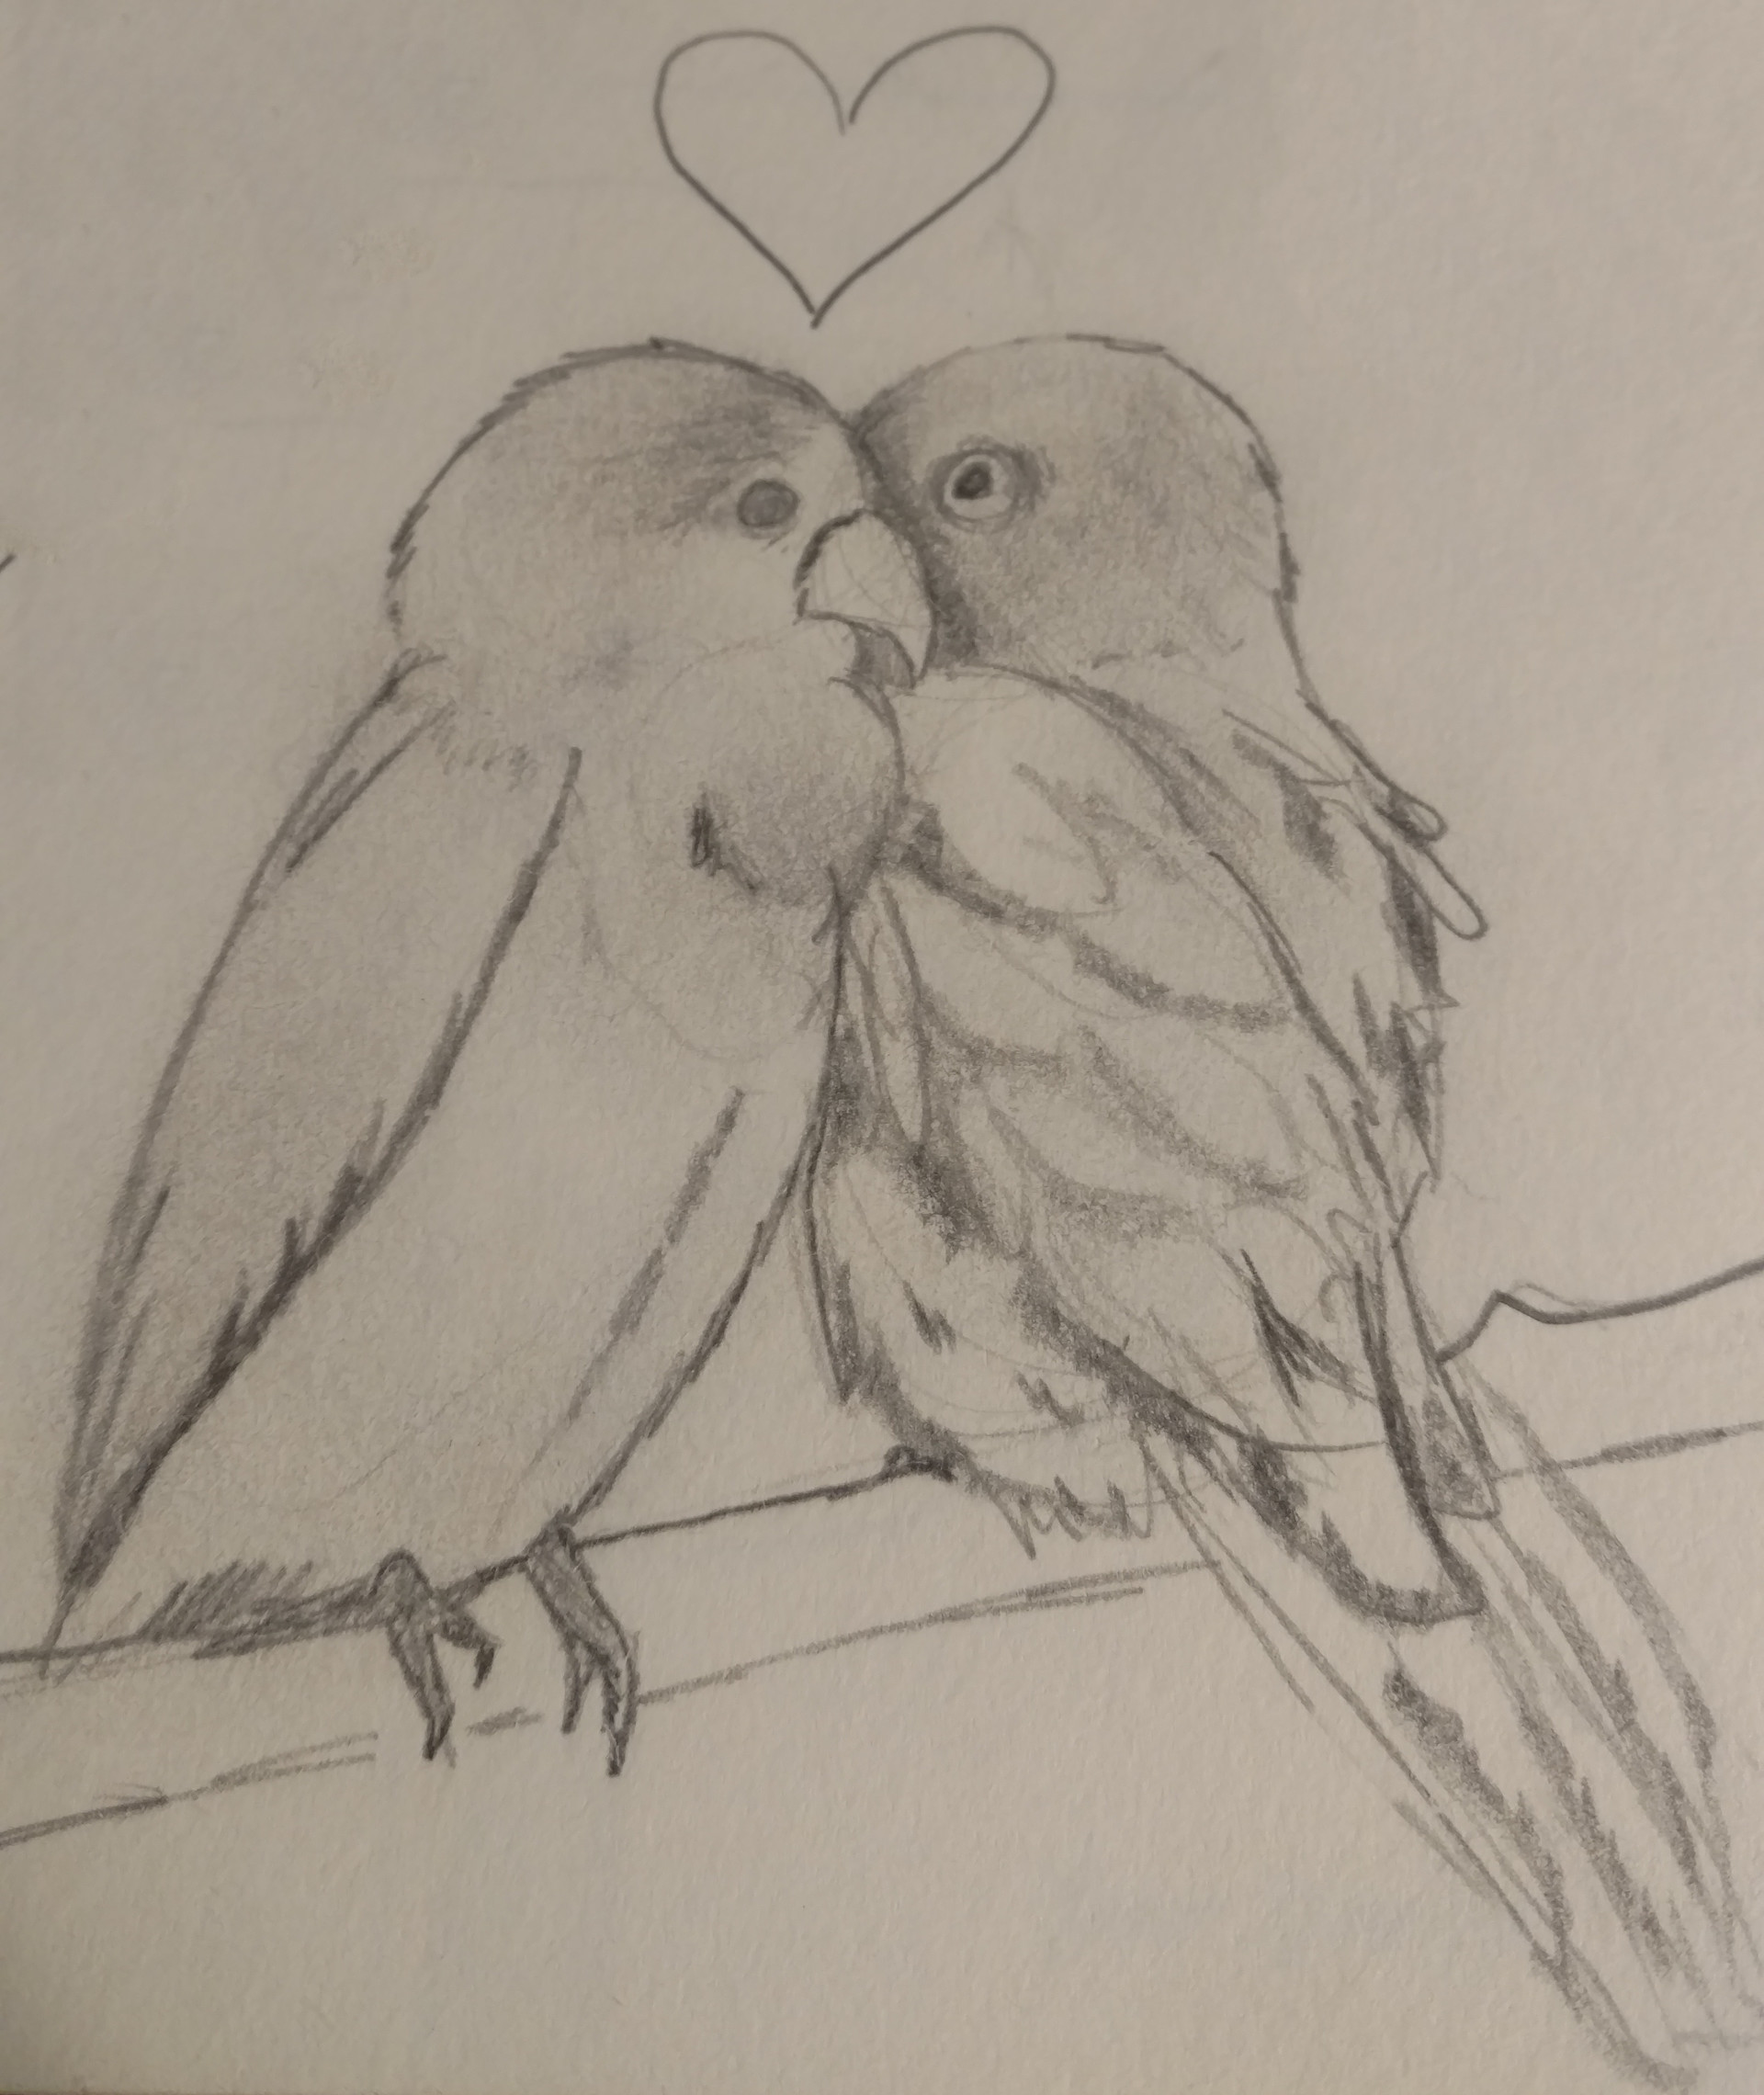 Simple Pencil drawing of love birds / How to draw love birds - YouTube